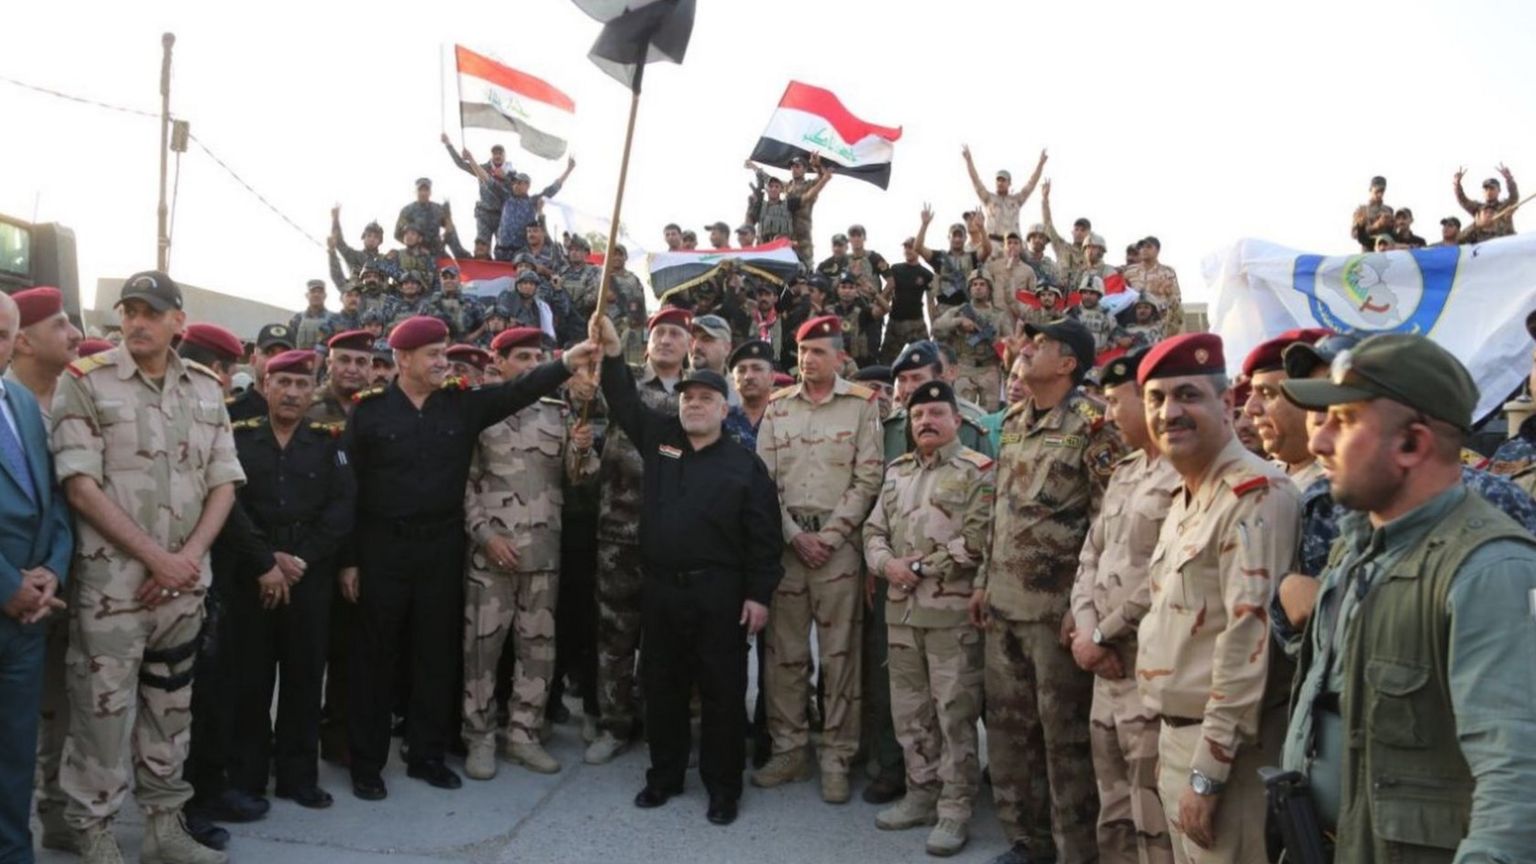 Photograph posted by Iraqi prime minister's office showing Haider al-Abadi (centre) waving a national flag after declaring victory in the battle for Mosul (10 June 2017)